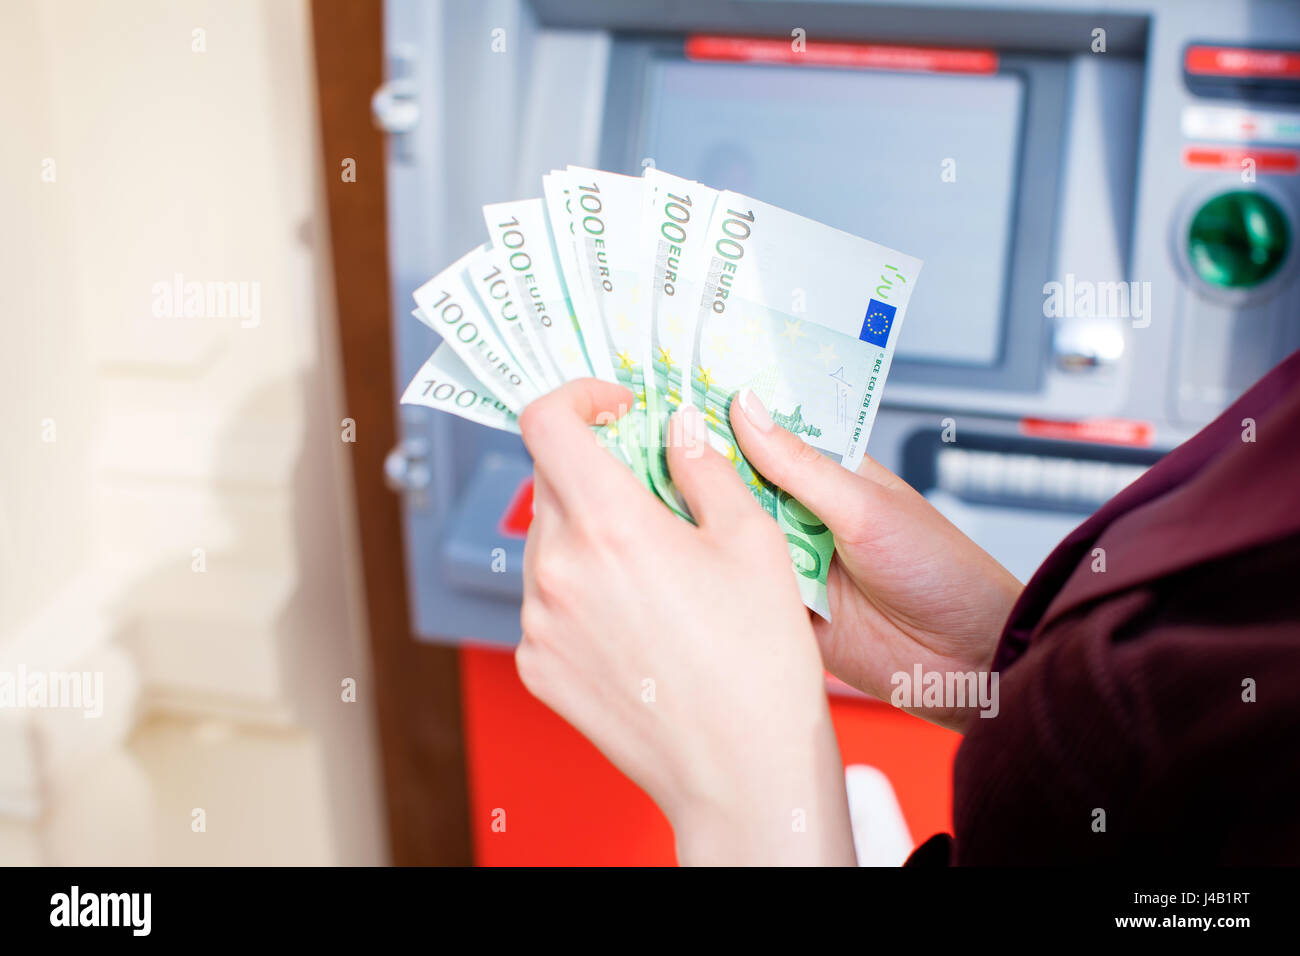 Repayment on credit. Woman hand withdrawing money from outdoor bank ATM Stock Photo